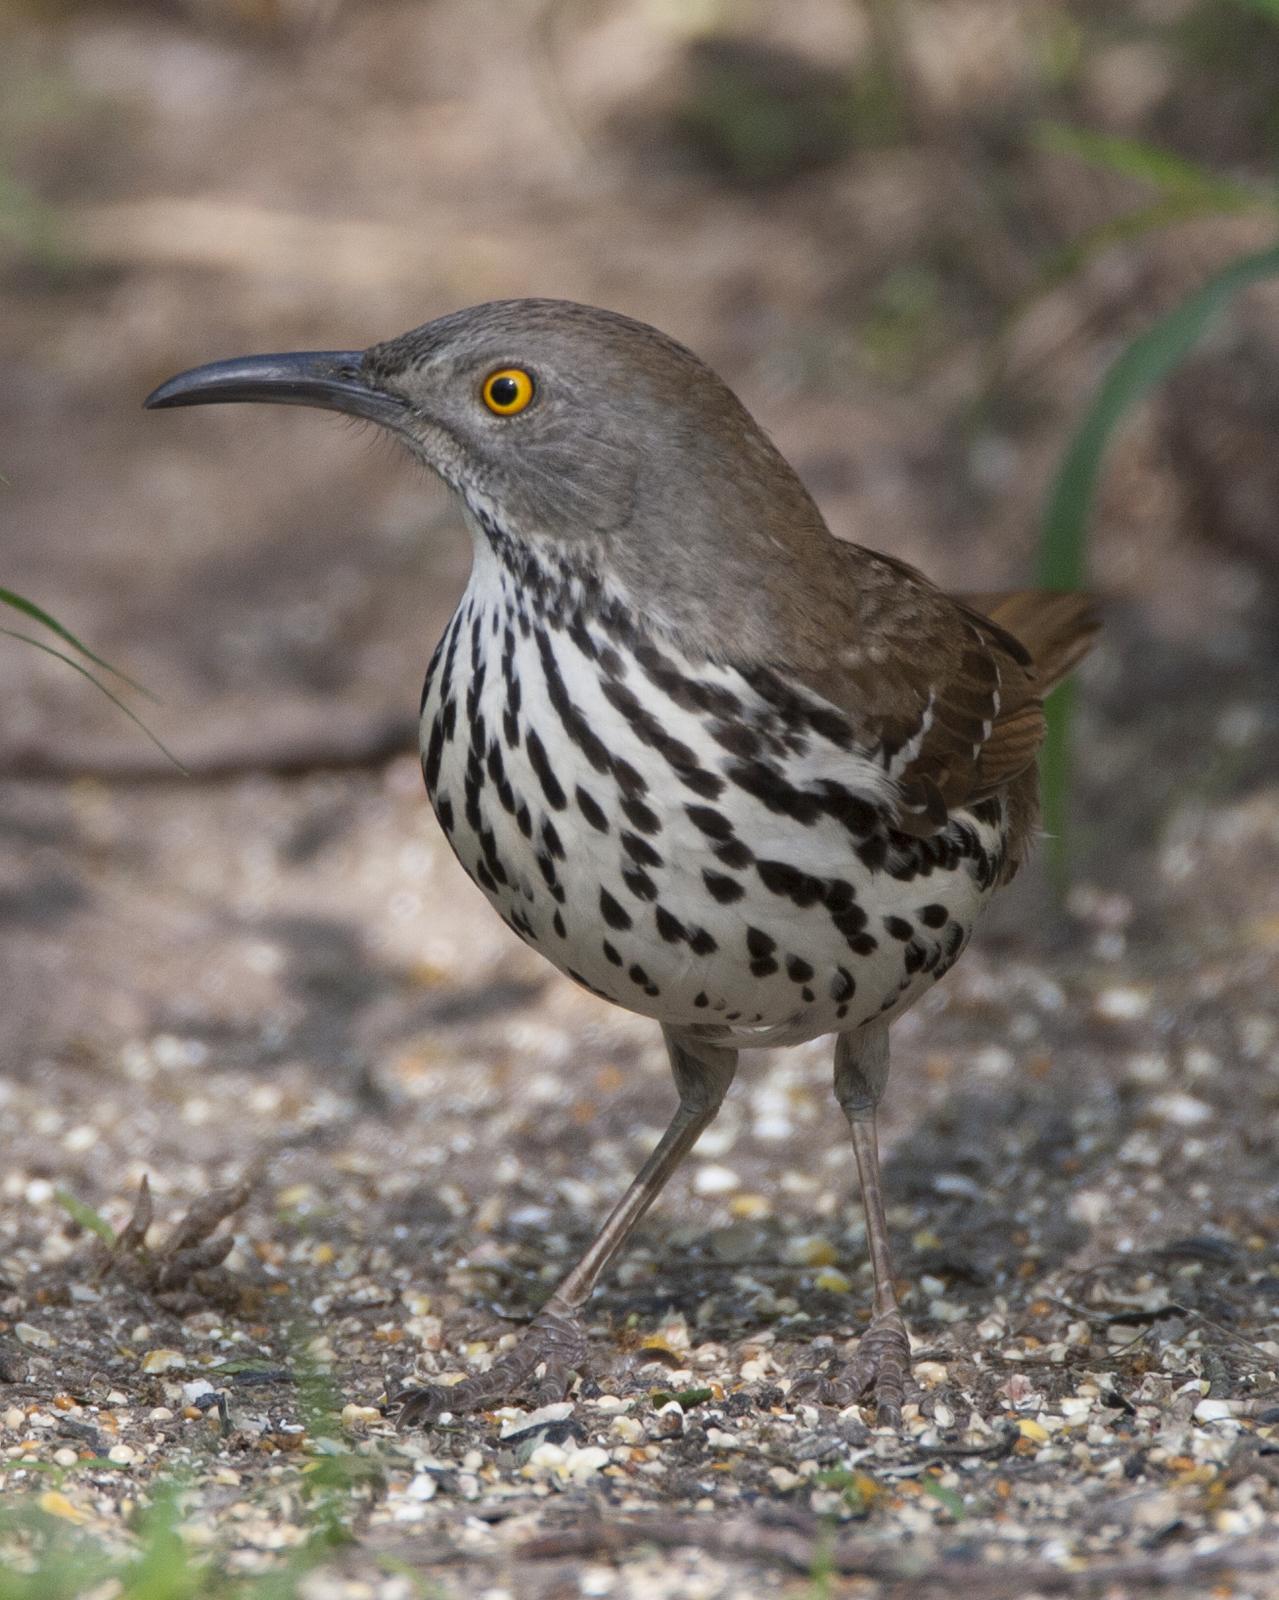 Long-billed Thrasher Photo by Jeff Moore